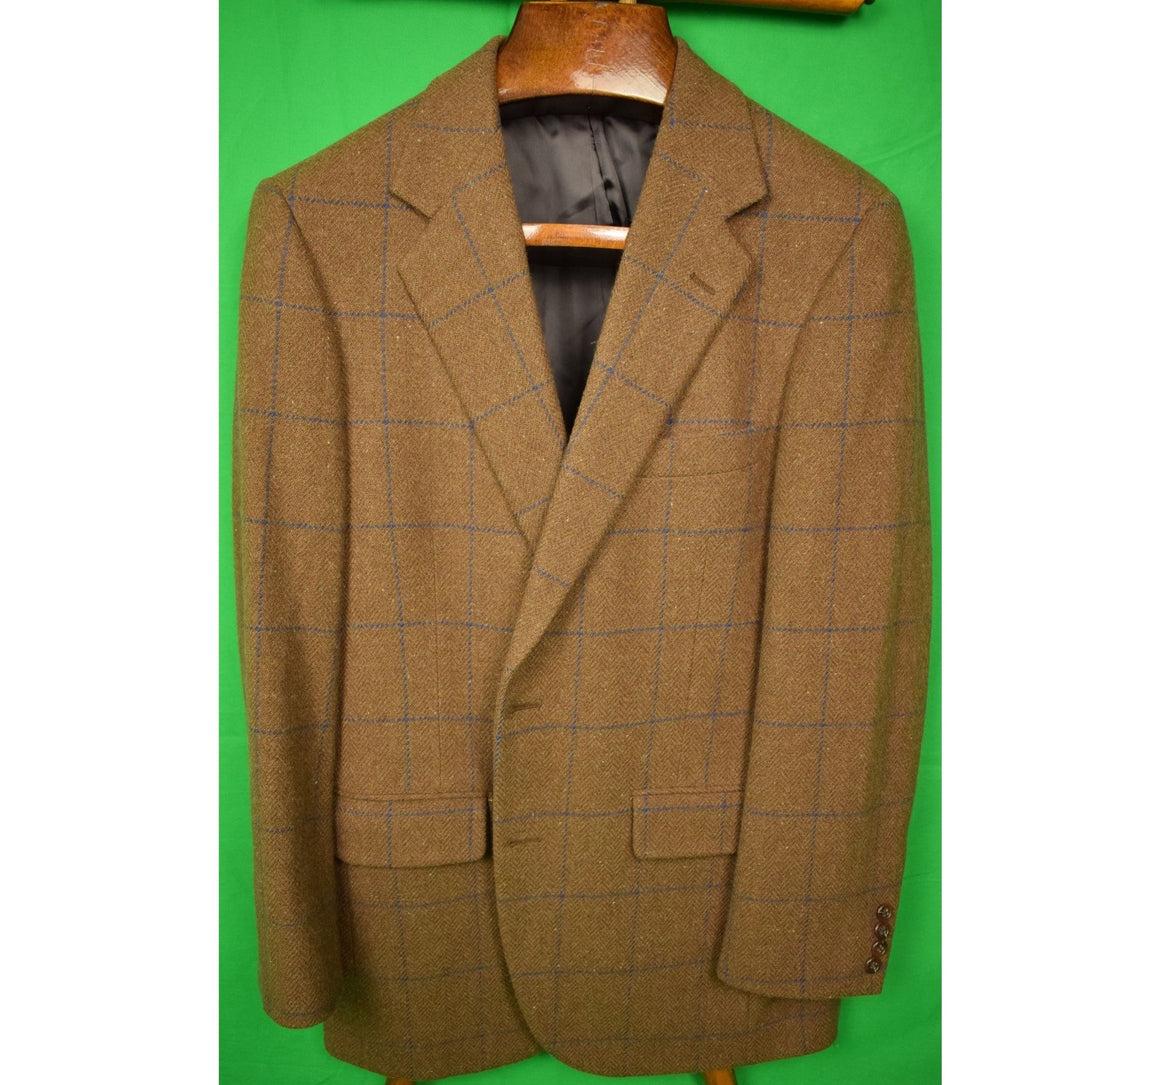 "The Andover Shop Cocoa Wool/ Cashmere Tweed w/ Blue Windowpane Pattern Sport Jacket" Sz 41R